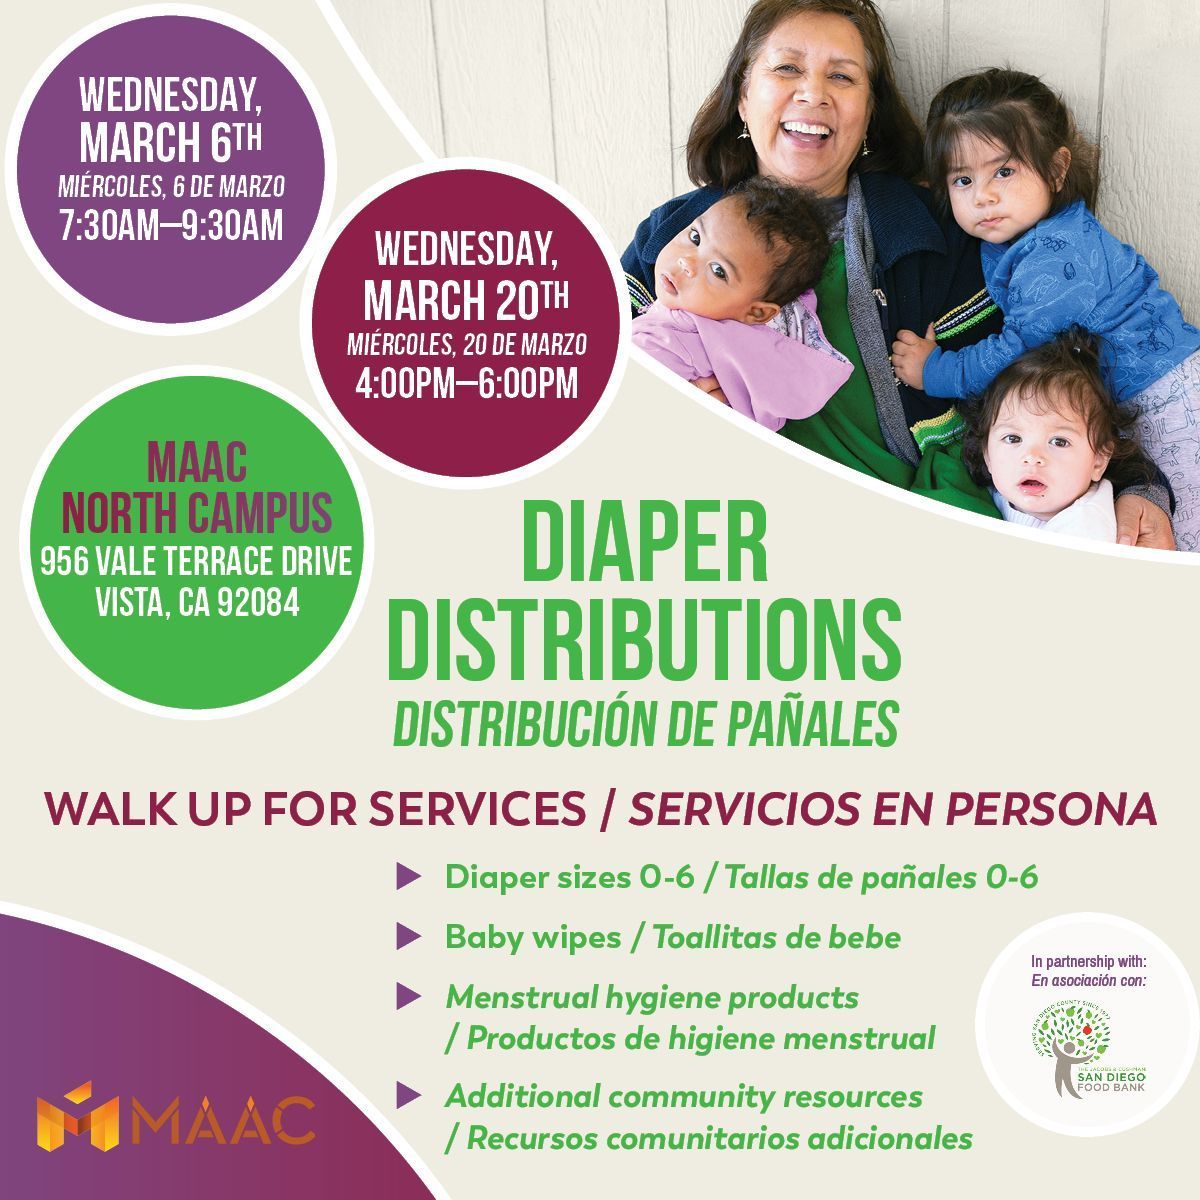 Our next diaper distribution is taking place this Wednesday, March 6th from 7:30-9:30 a.m. at MAAC's North Campus (956 Vale Terrace Drive Vista, CA 92084). Along with diapers, our team will also provide baby wipes, and menstrual hygiene products. #DiaperDistribution